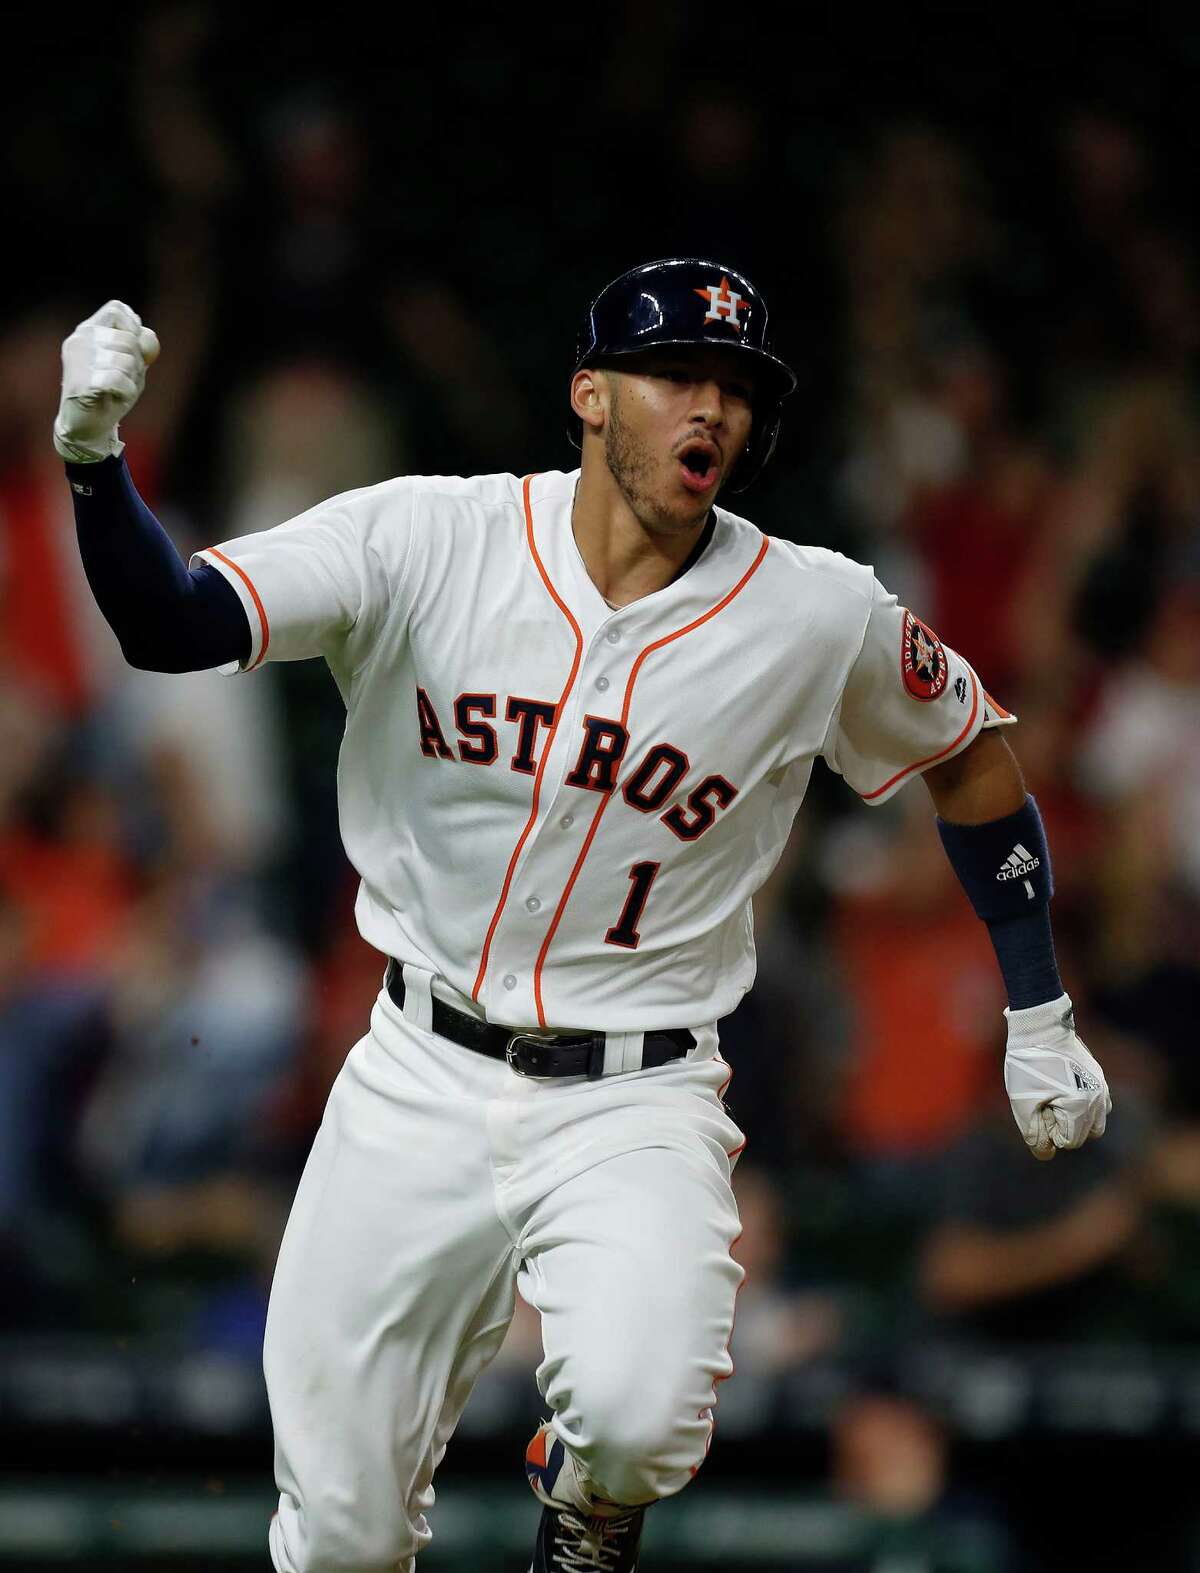 Shortstop Carlos Correa, who at all of 22 years is already an American League star, will be one of the cornerstones in a deeper Astros batting order in 2017.